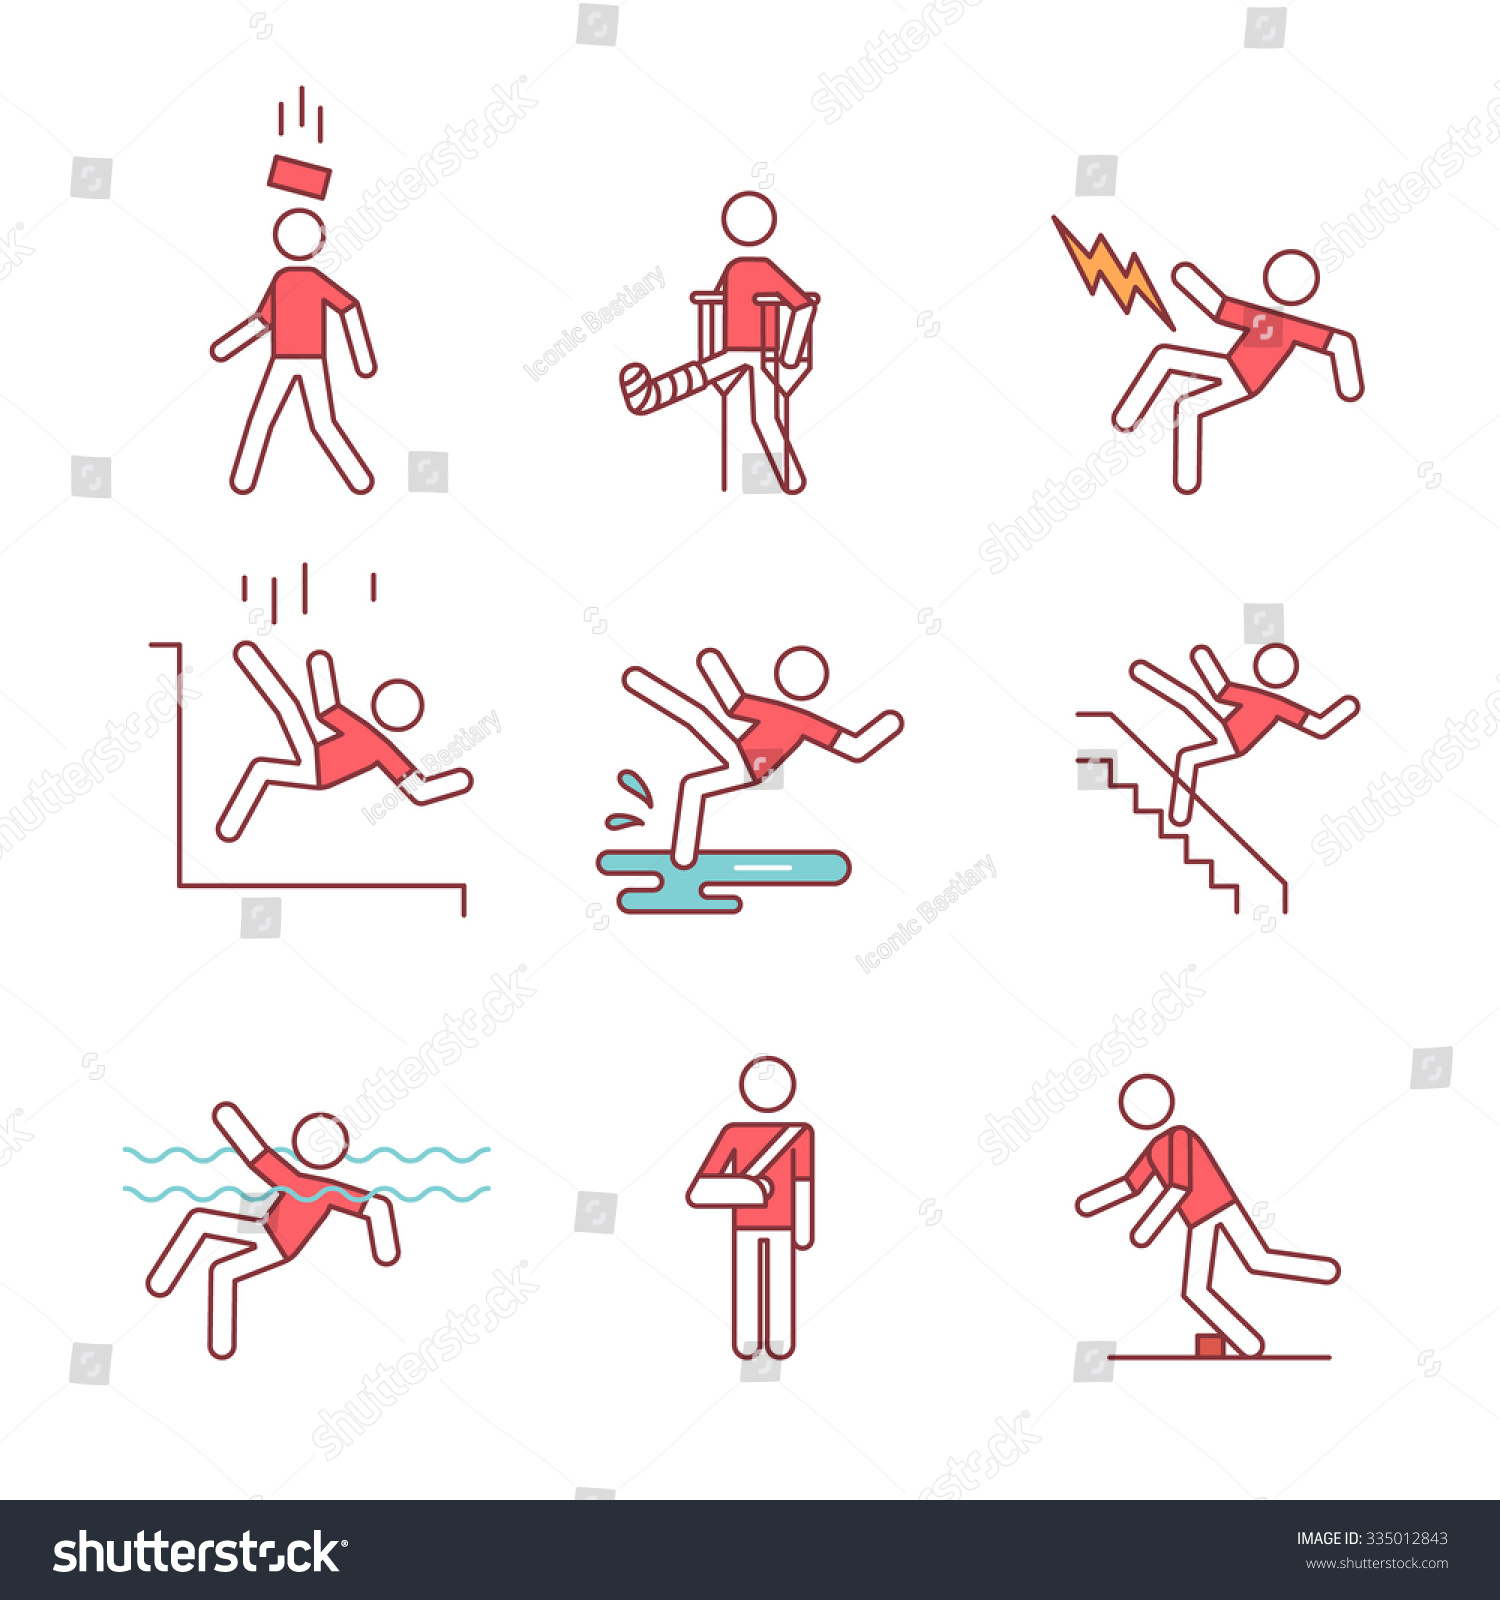 SVG of Man accident and traumas safety sign set. Thin line art icons. Flat style illustrations isolated on white. svg